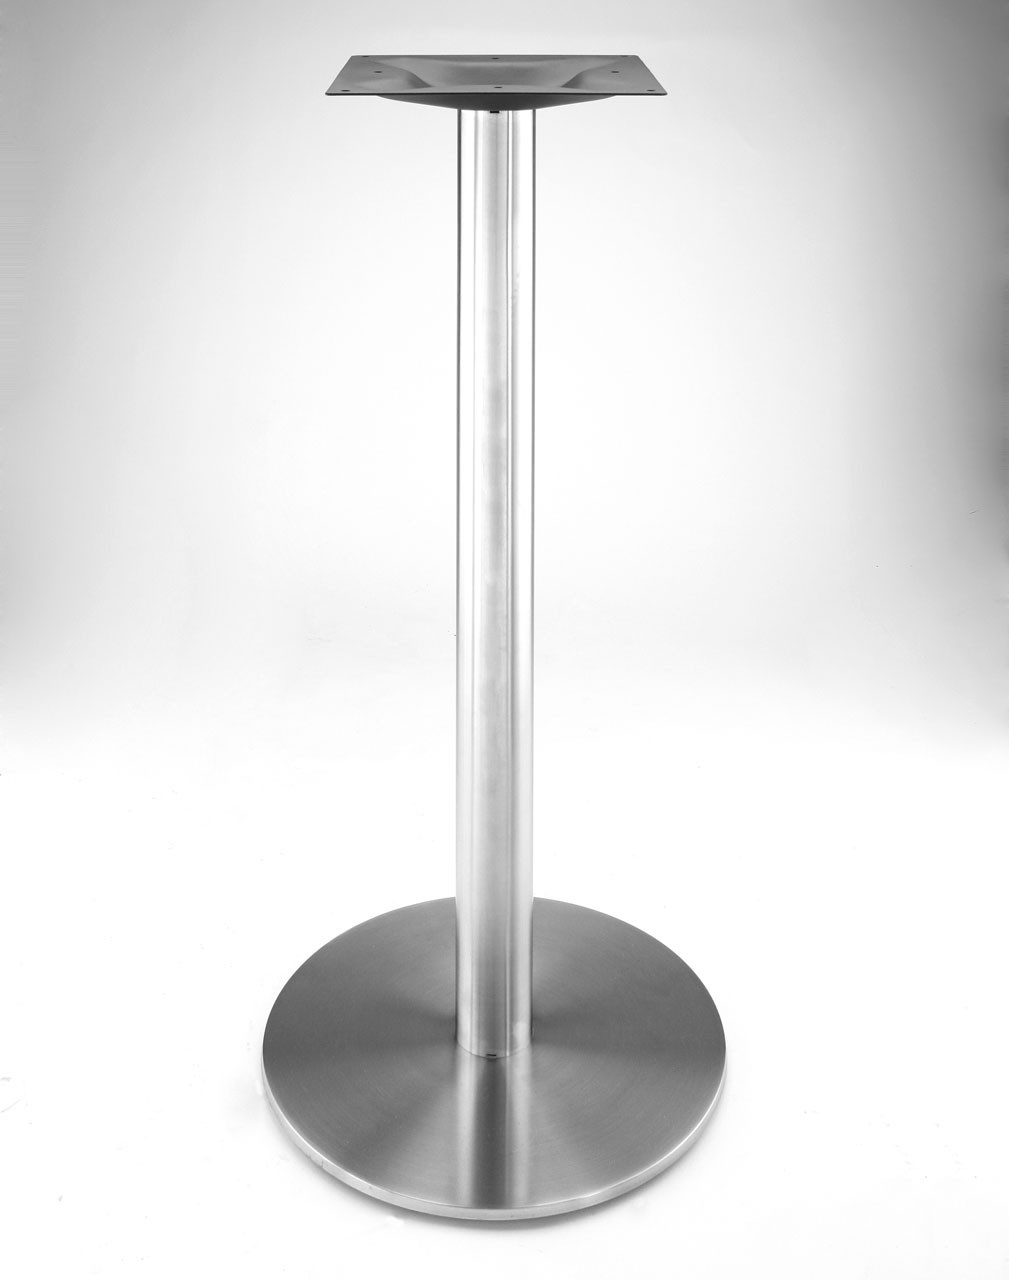 Stainless steel 18" round disk style pedestal table base, 40.75" Bar Height